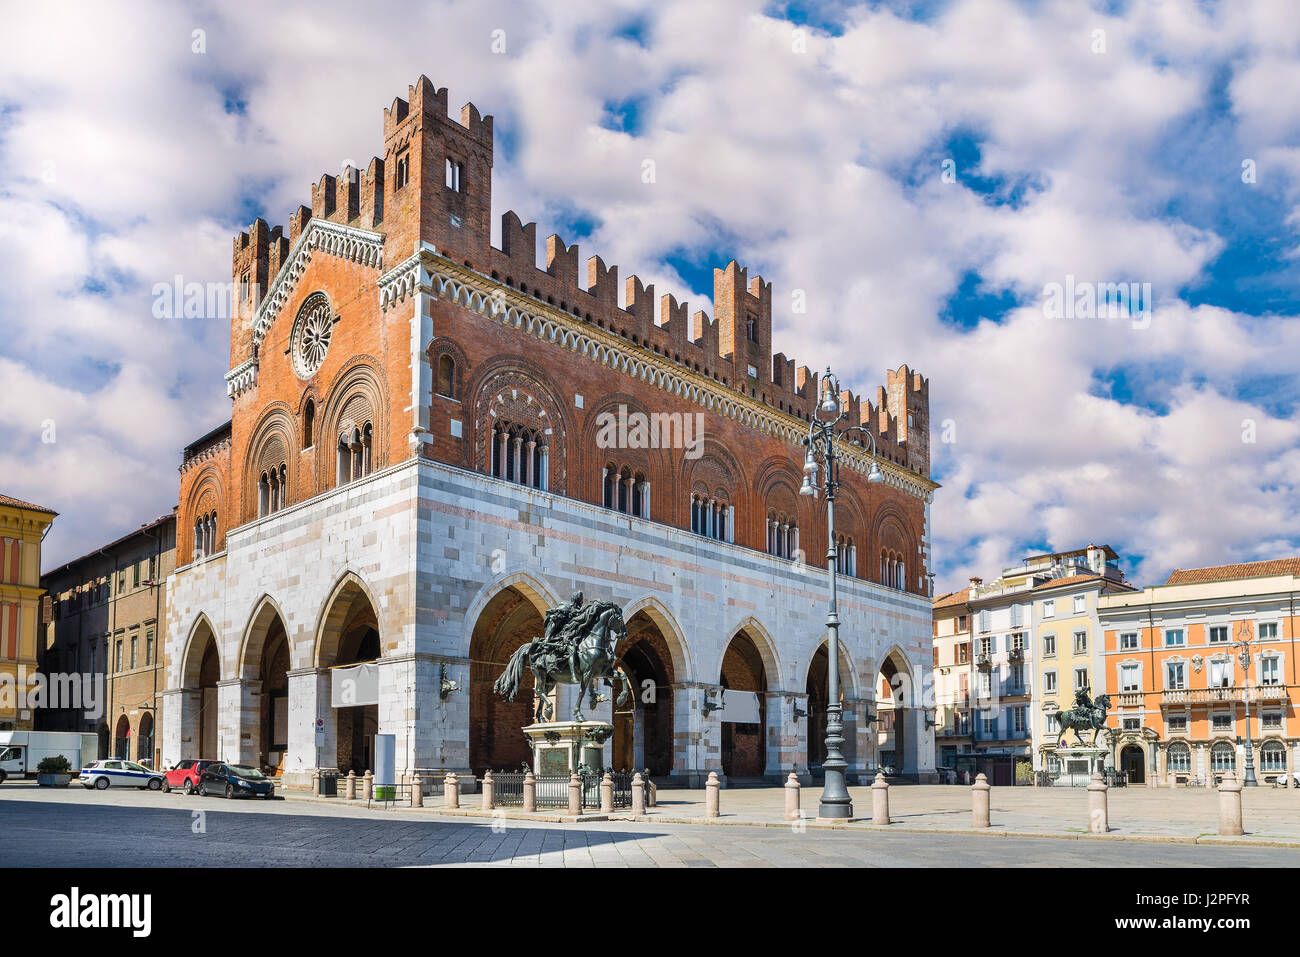 Piacenza, Italy. Piazza Cavalli (Square horses) and palazzo Gotico (Gothic palace) or palazzo Comunale  in the city center Stock Photo